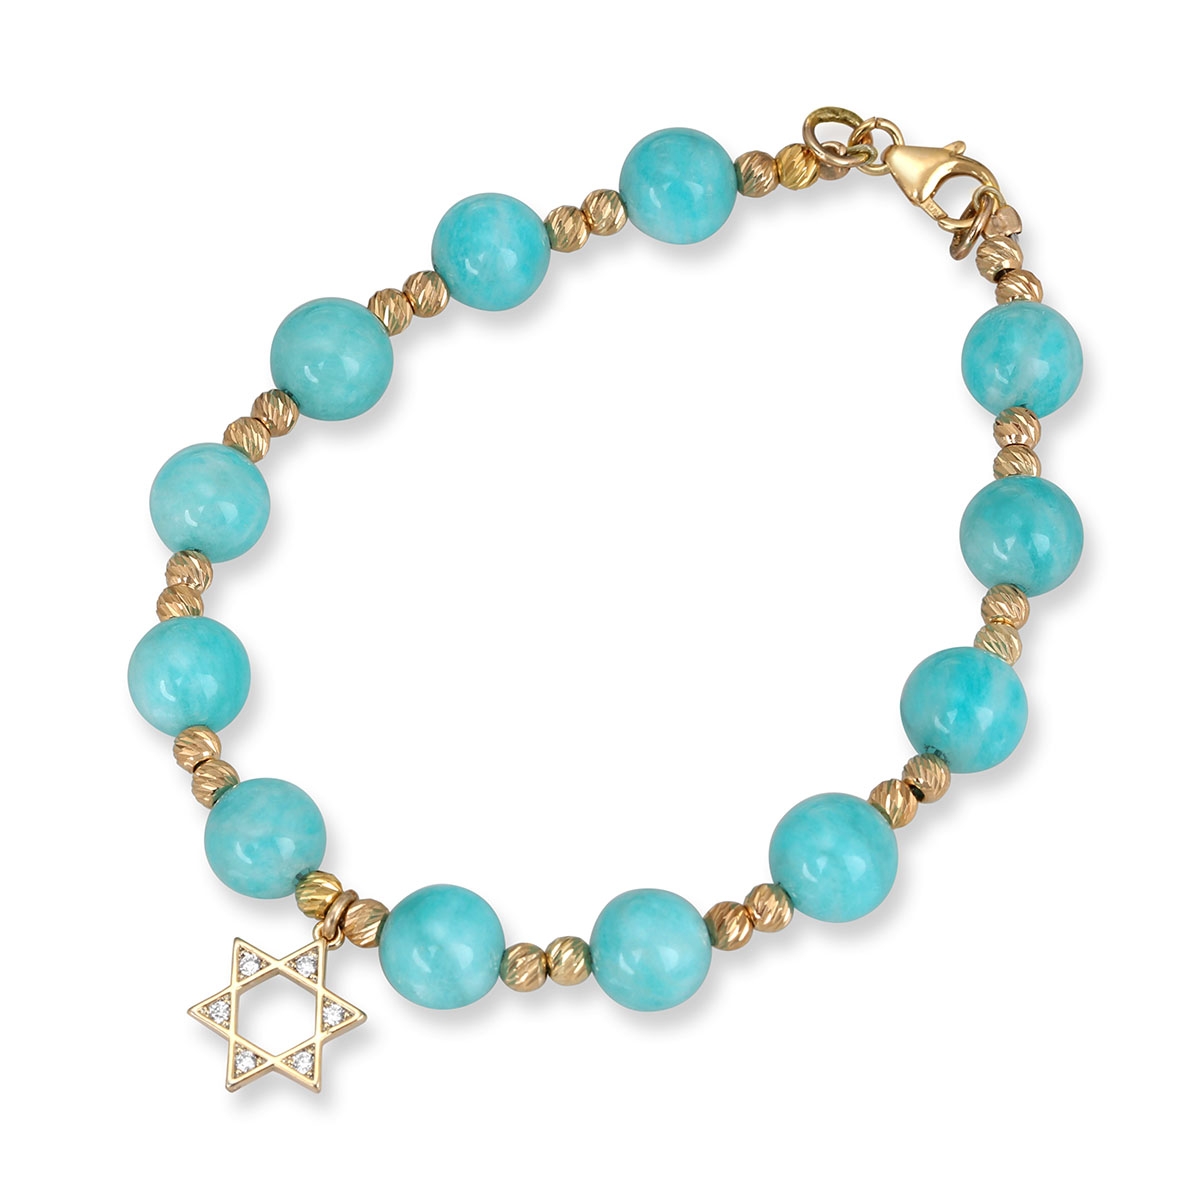 Turquoise Stones Bracelet With Star of David - 1